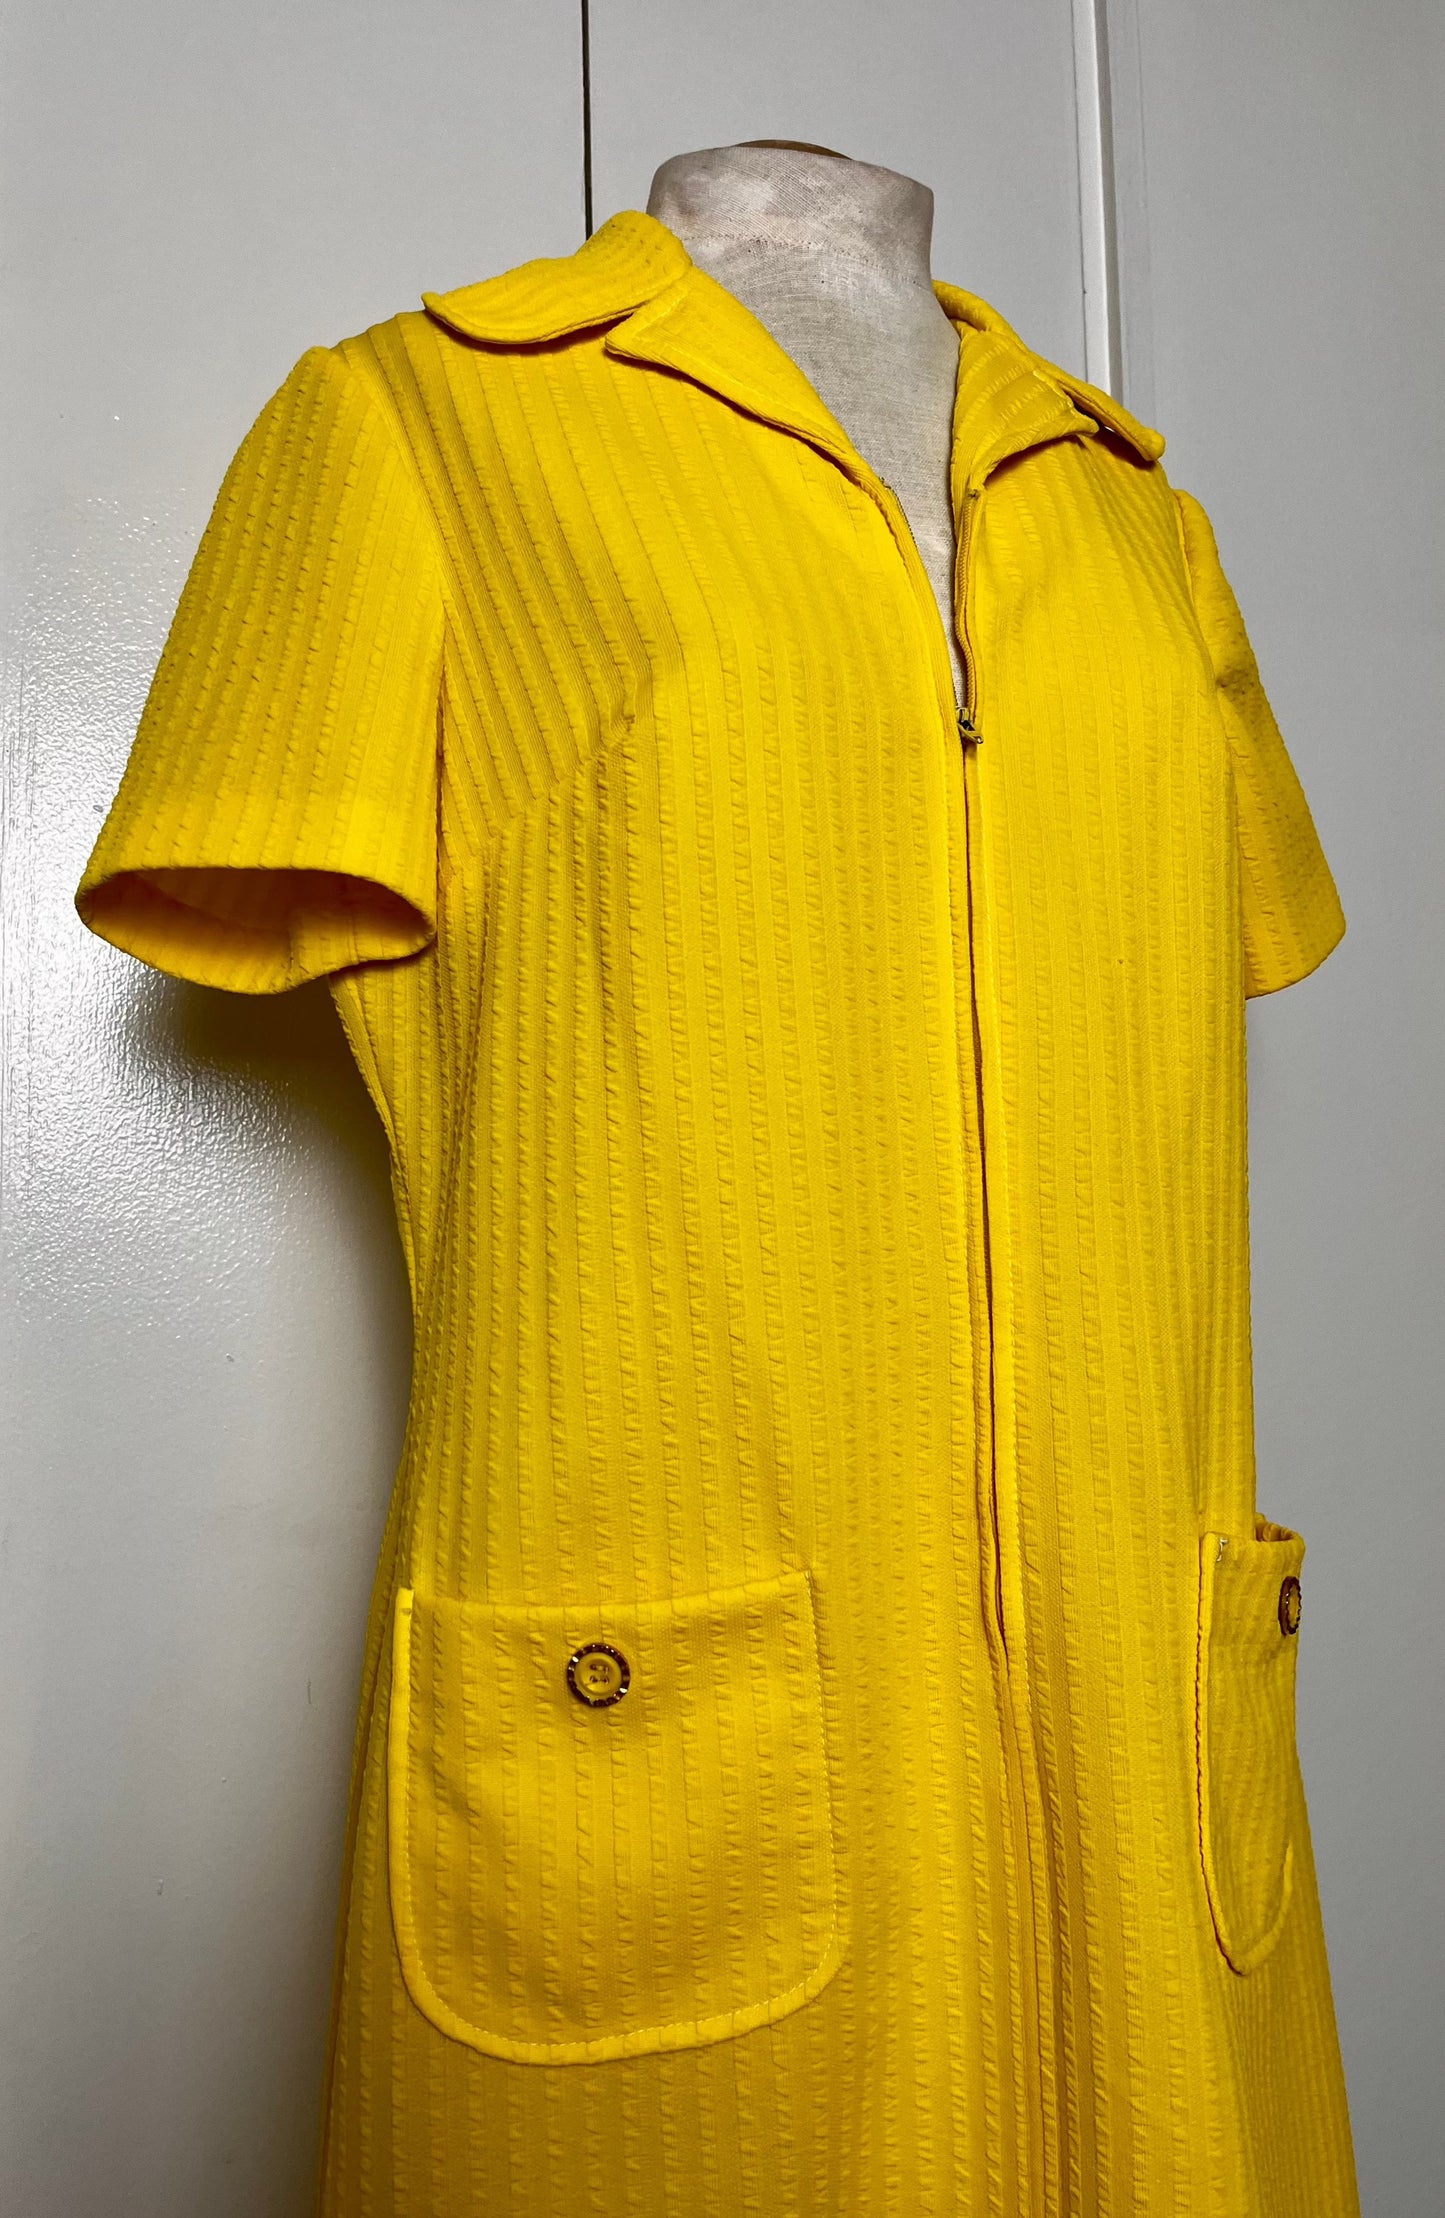 Vintage 1970's "Route One" Yellow Shift Dress